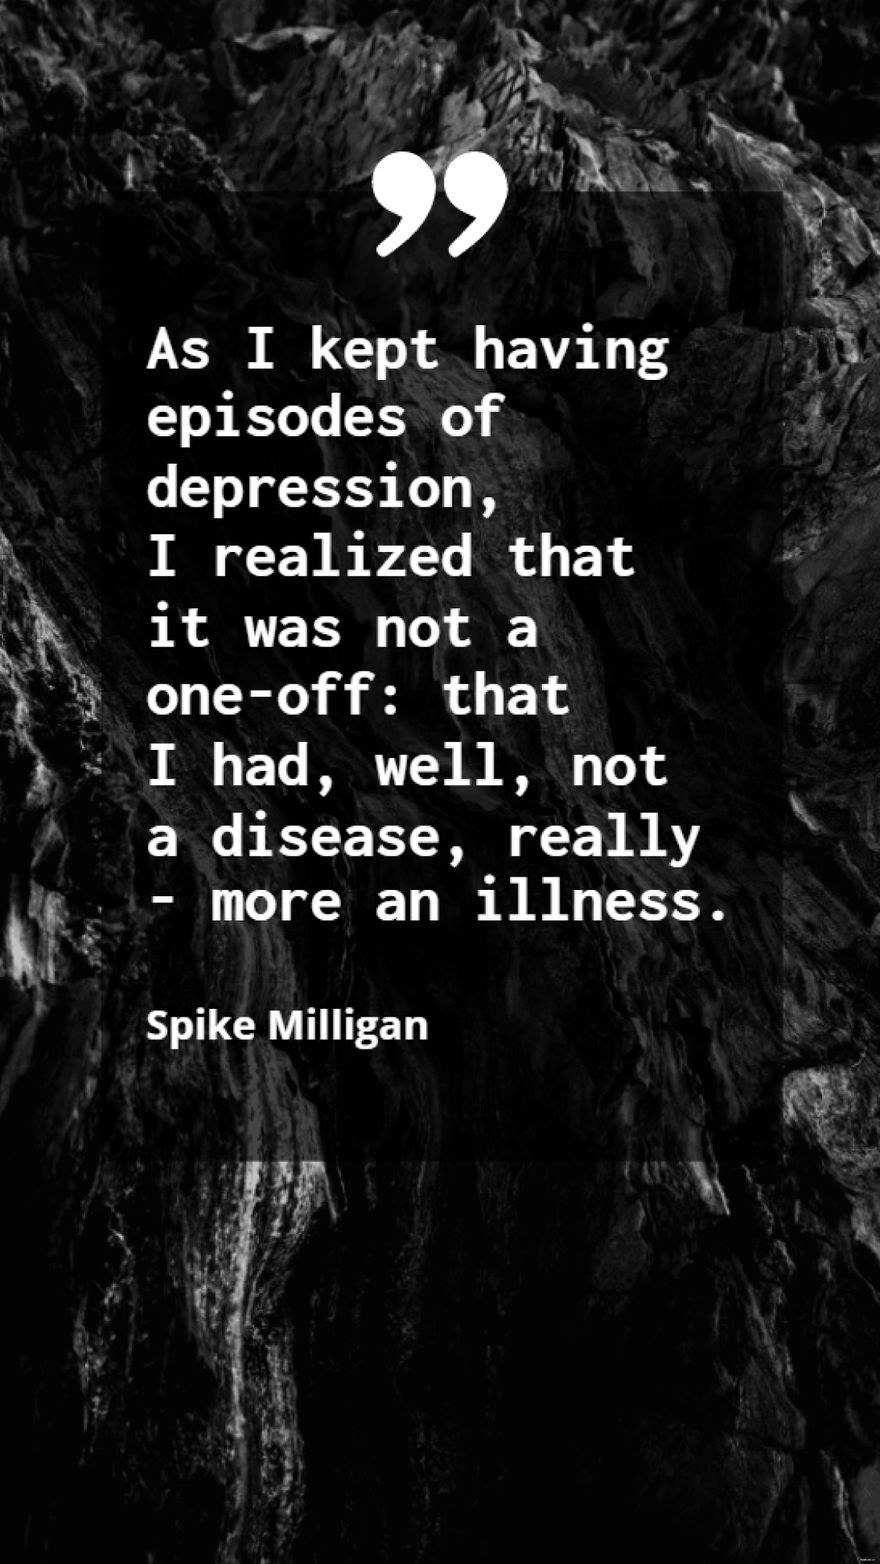 Spike Milligan - As I kept having episodes of depression, I realized that it was not a one-off: that I had, well, not a disease, really - more an illness.